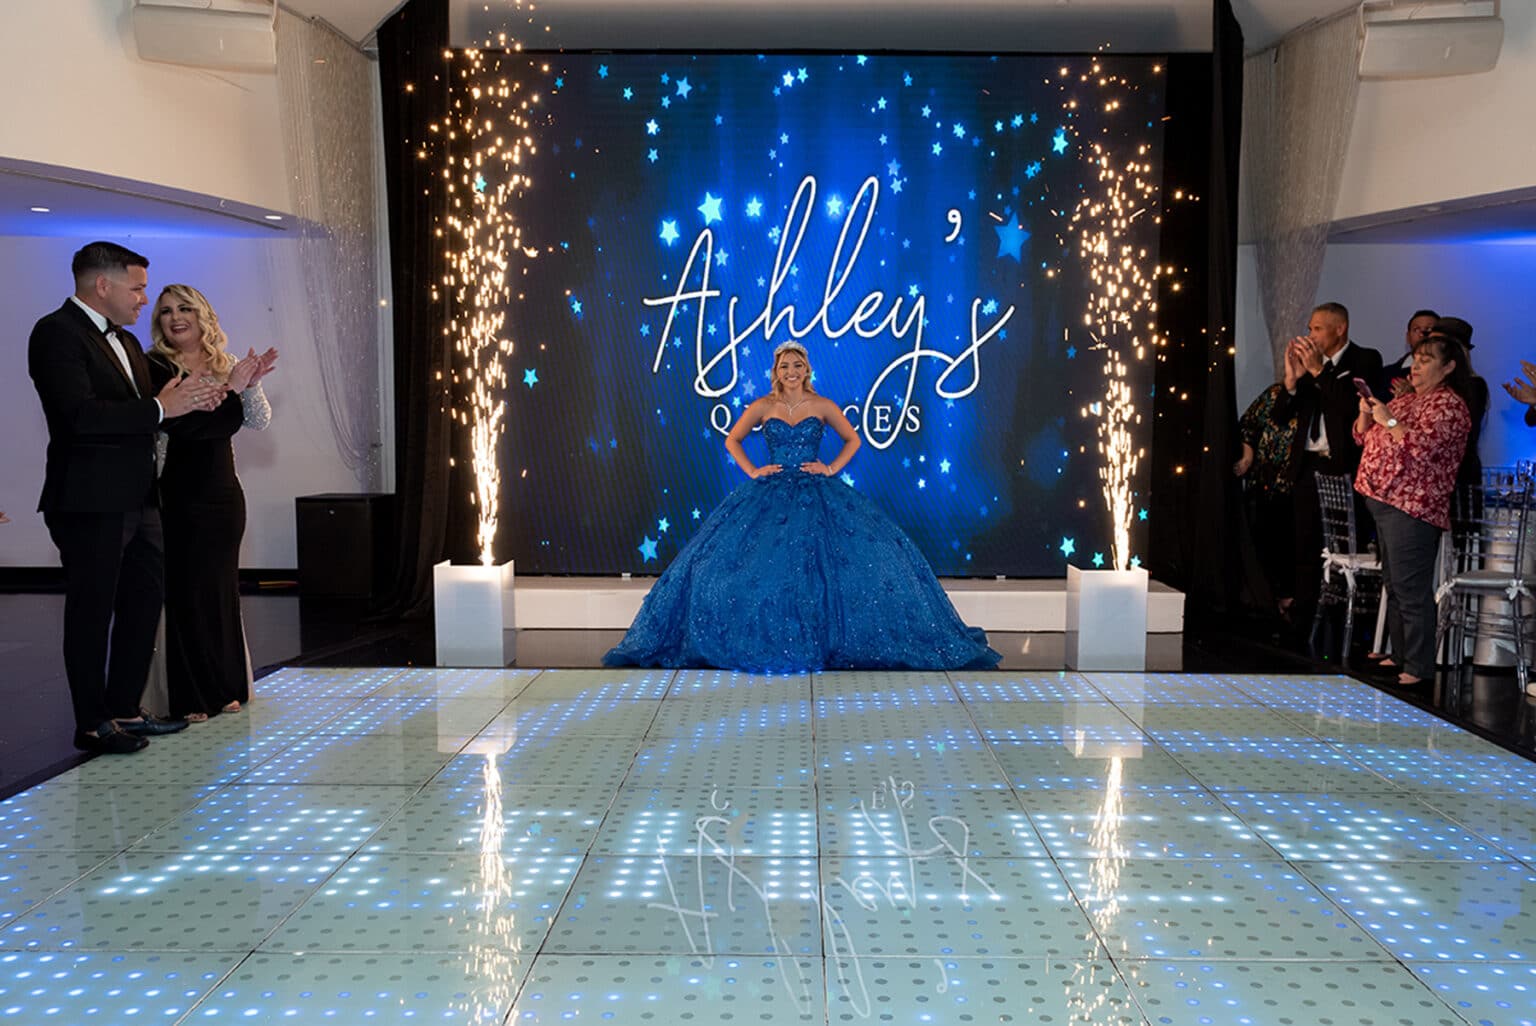 Ashley's Quinces at a Quinceañera Venue in Miami . Quinceañera with blue dress posing with fireworks